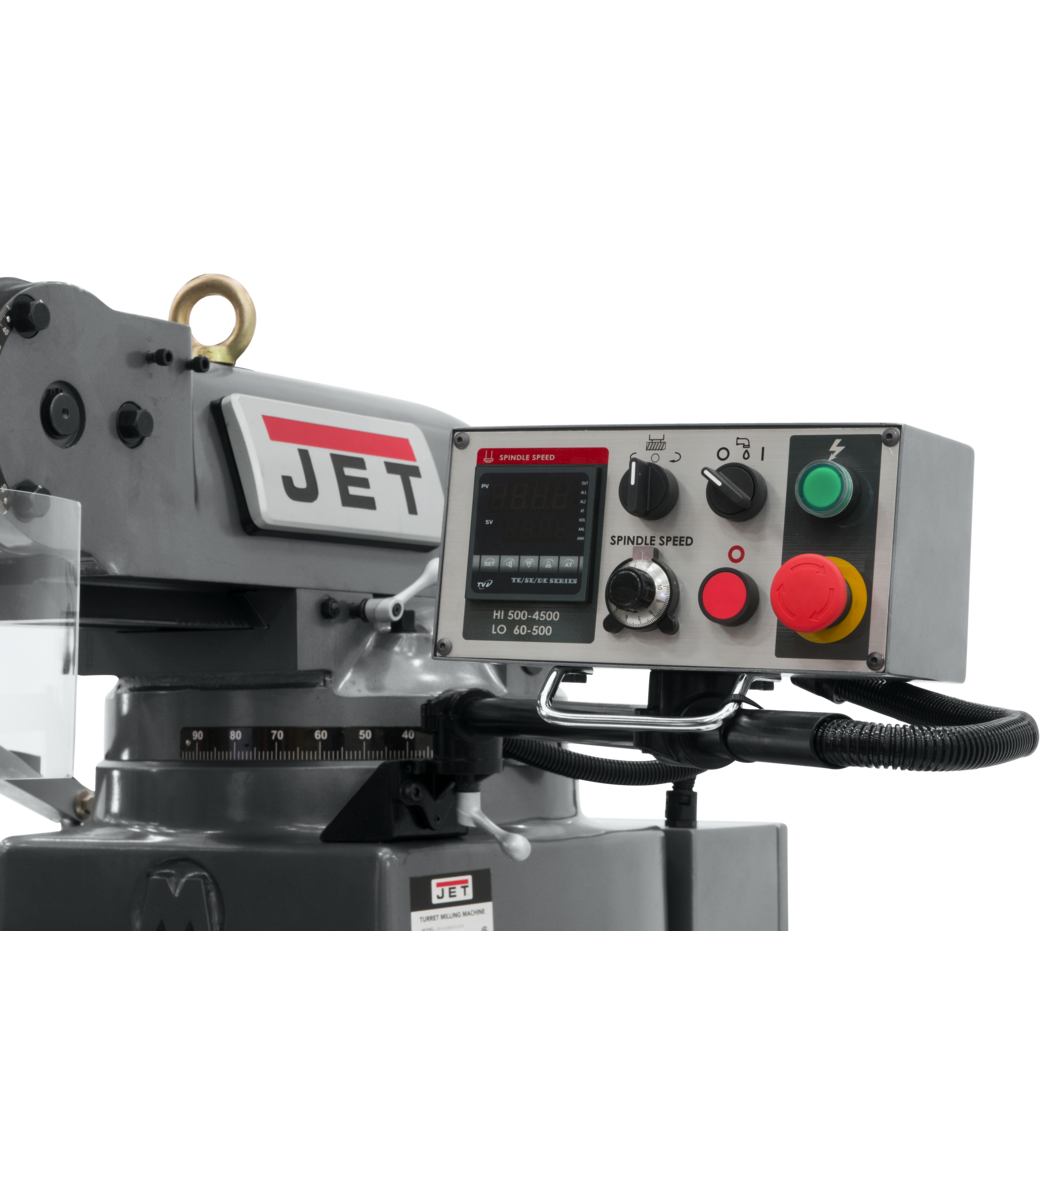 JET JTM-949EVS Mill With 3-Axis Newall DP700 DRO (Knee) With X-Axis Powerfeed and Air Powered Draw Bar